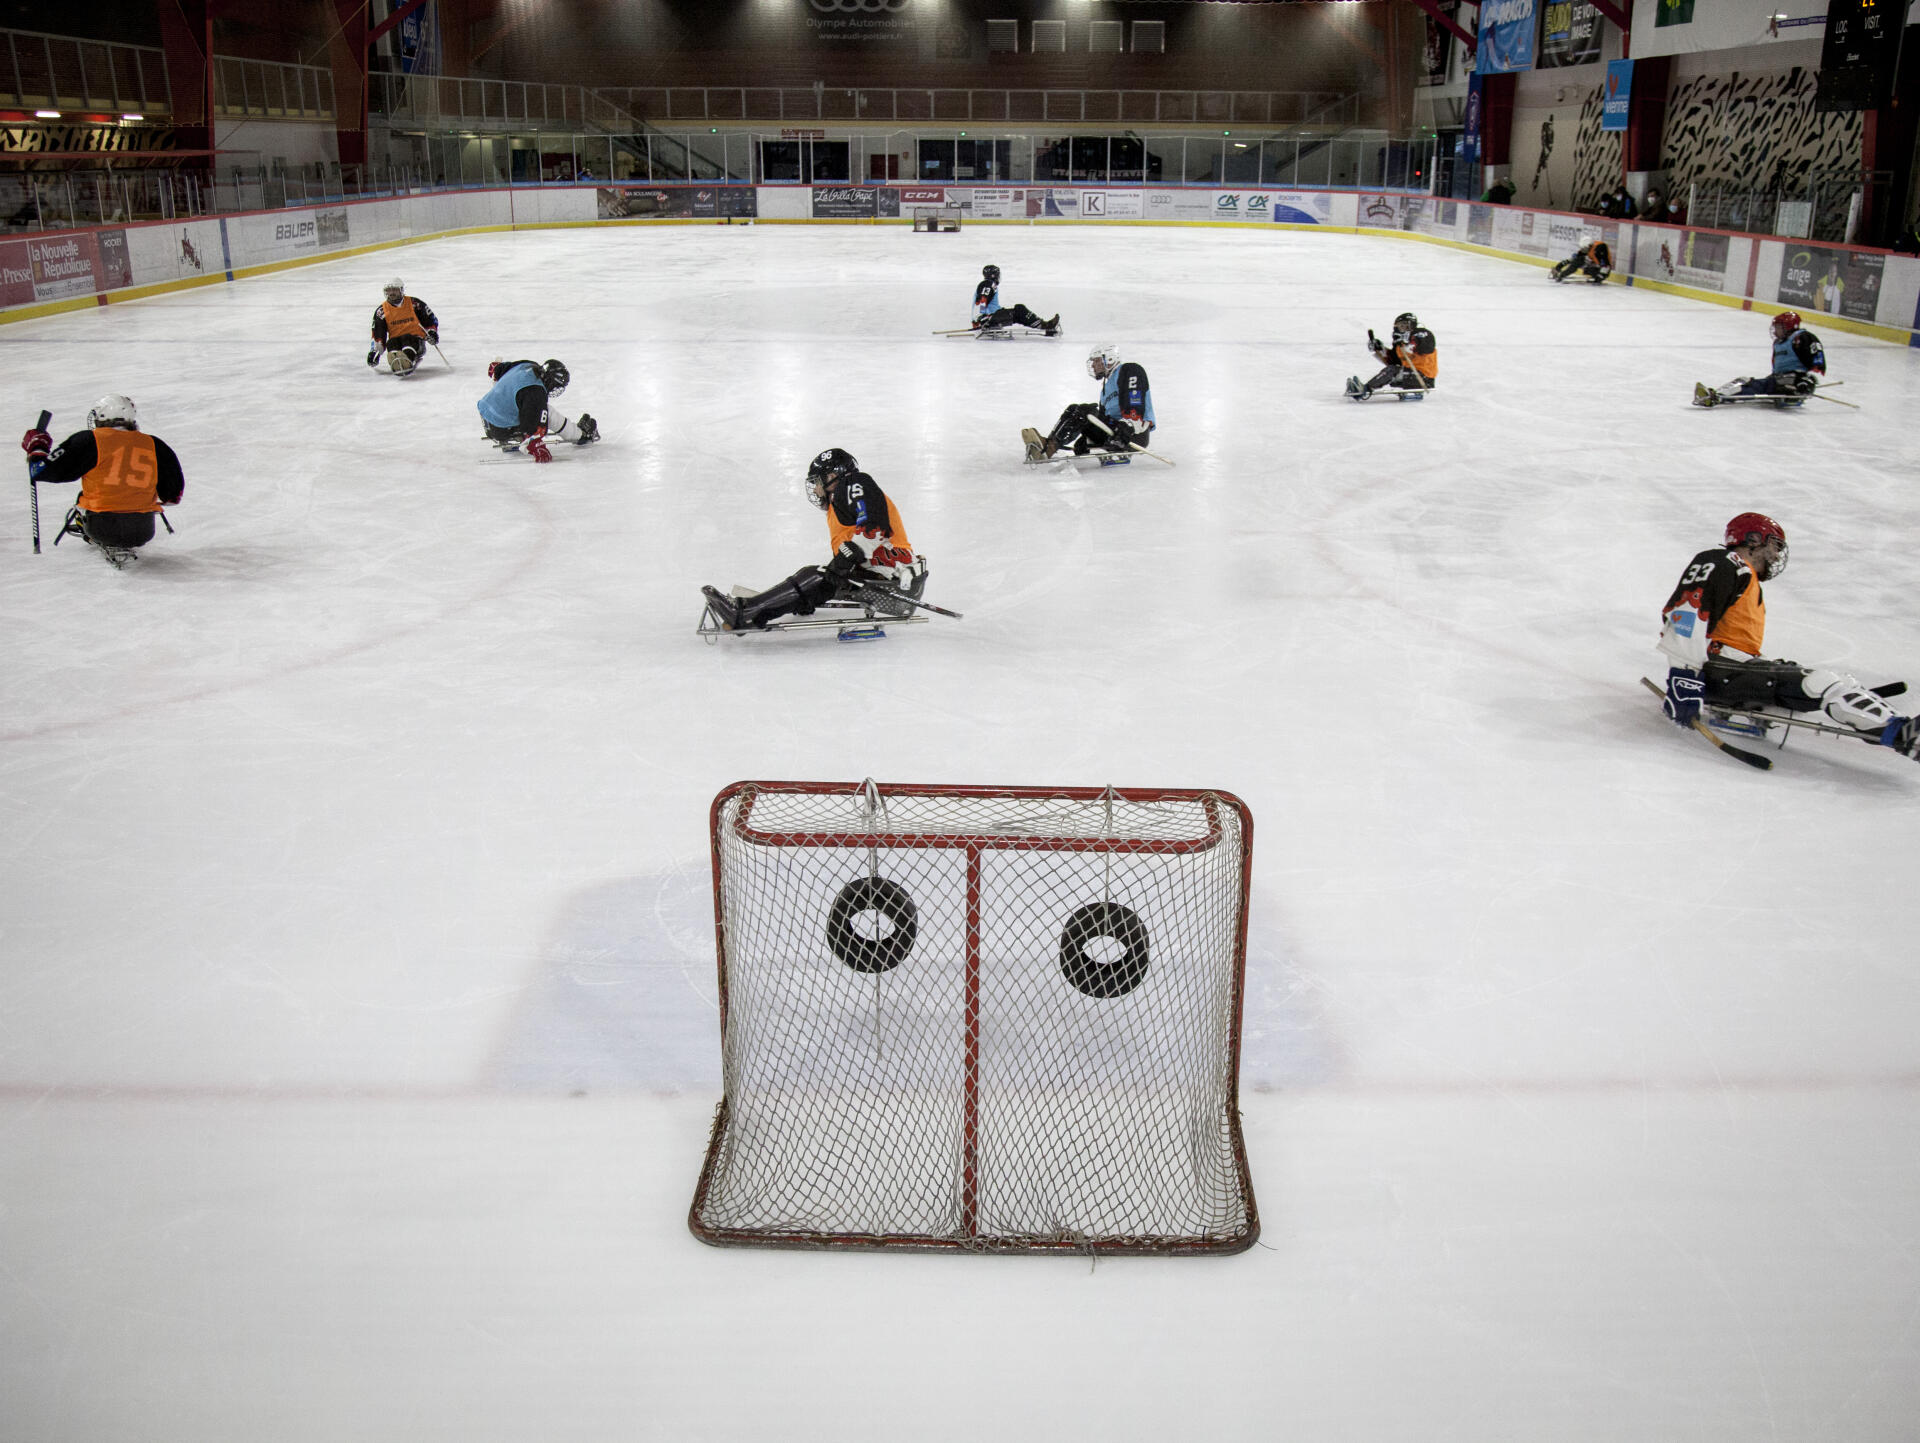 Para ice hockey players in training at the Poitiers Ice Rink on January 12, 2022.